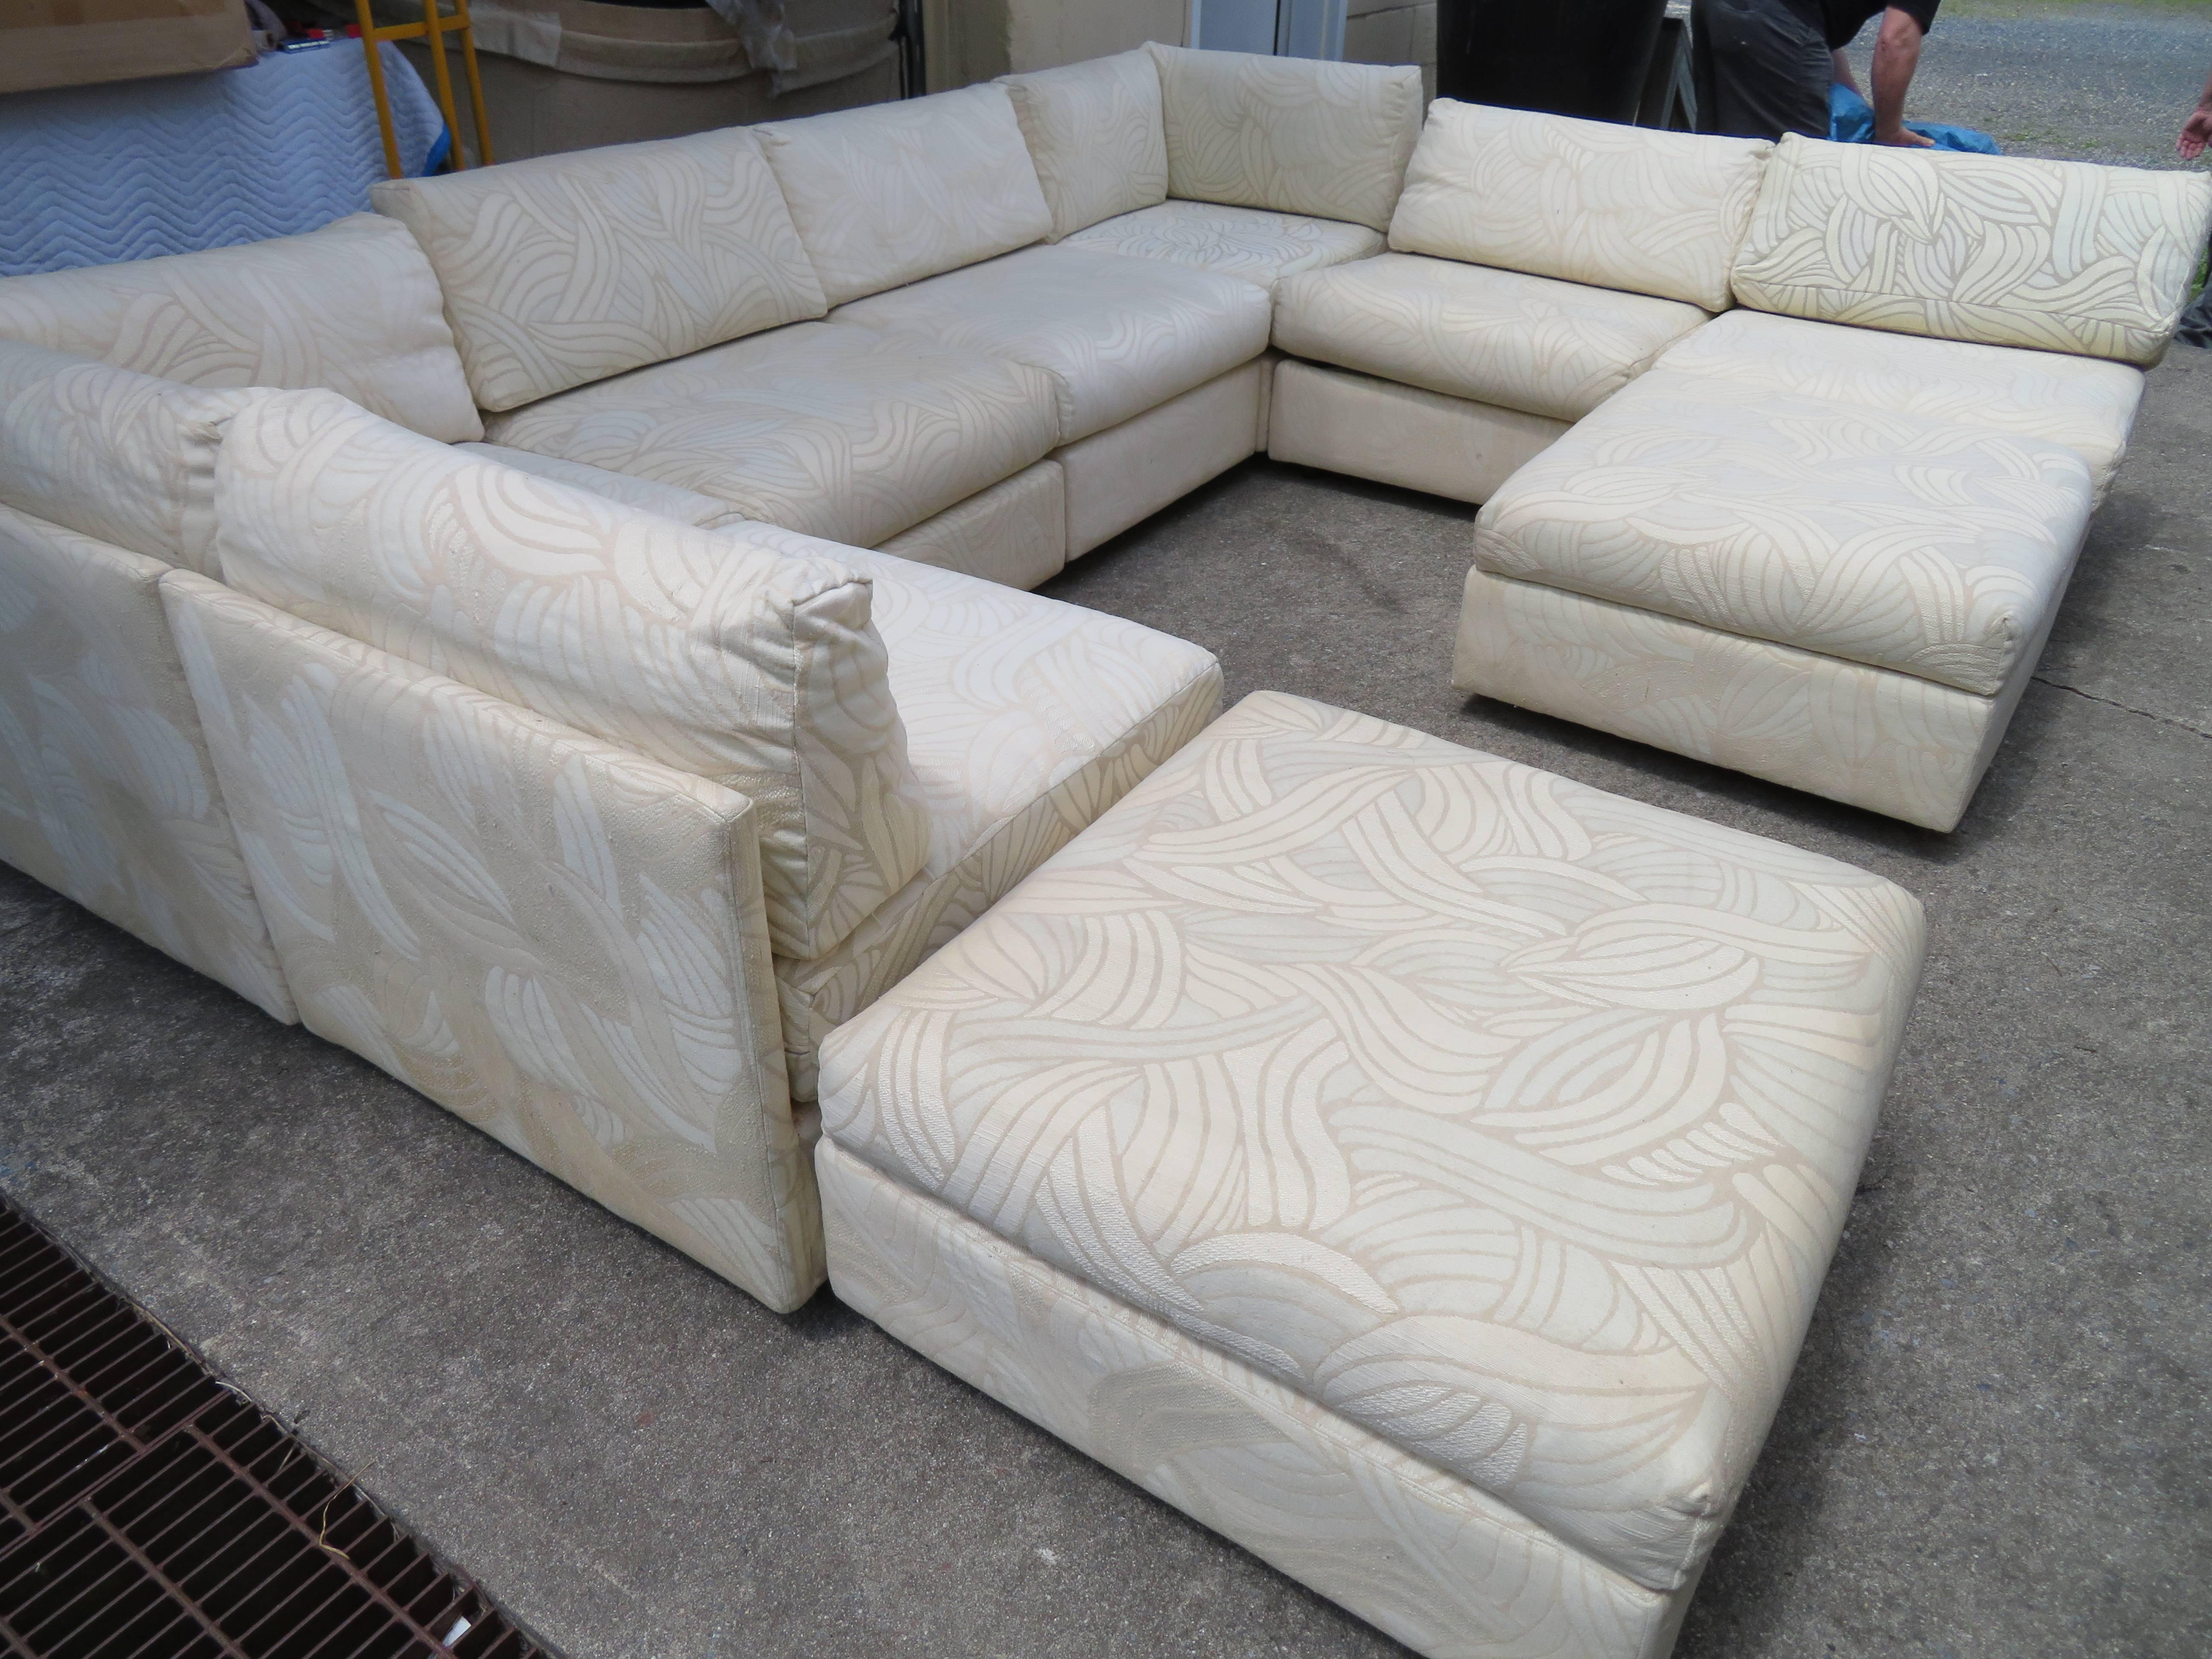 Spectacular Milo Baughman style eight-piece sectional sofa with sleeper sofa. The double seat piece on the right opens up to create a queen-size pull-out sleeper-how fabulous is that! Looks like it has never been used and is in great condition-still